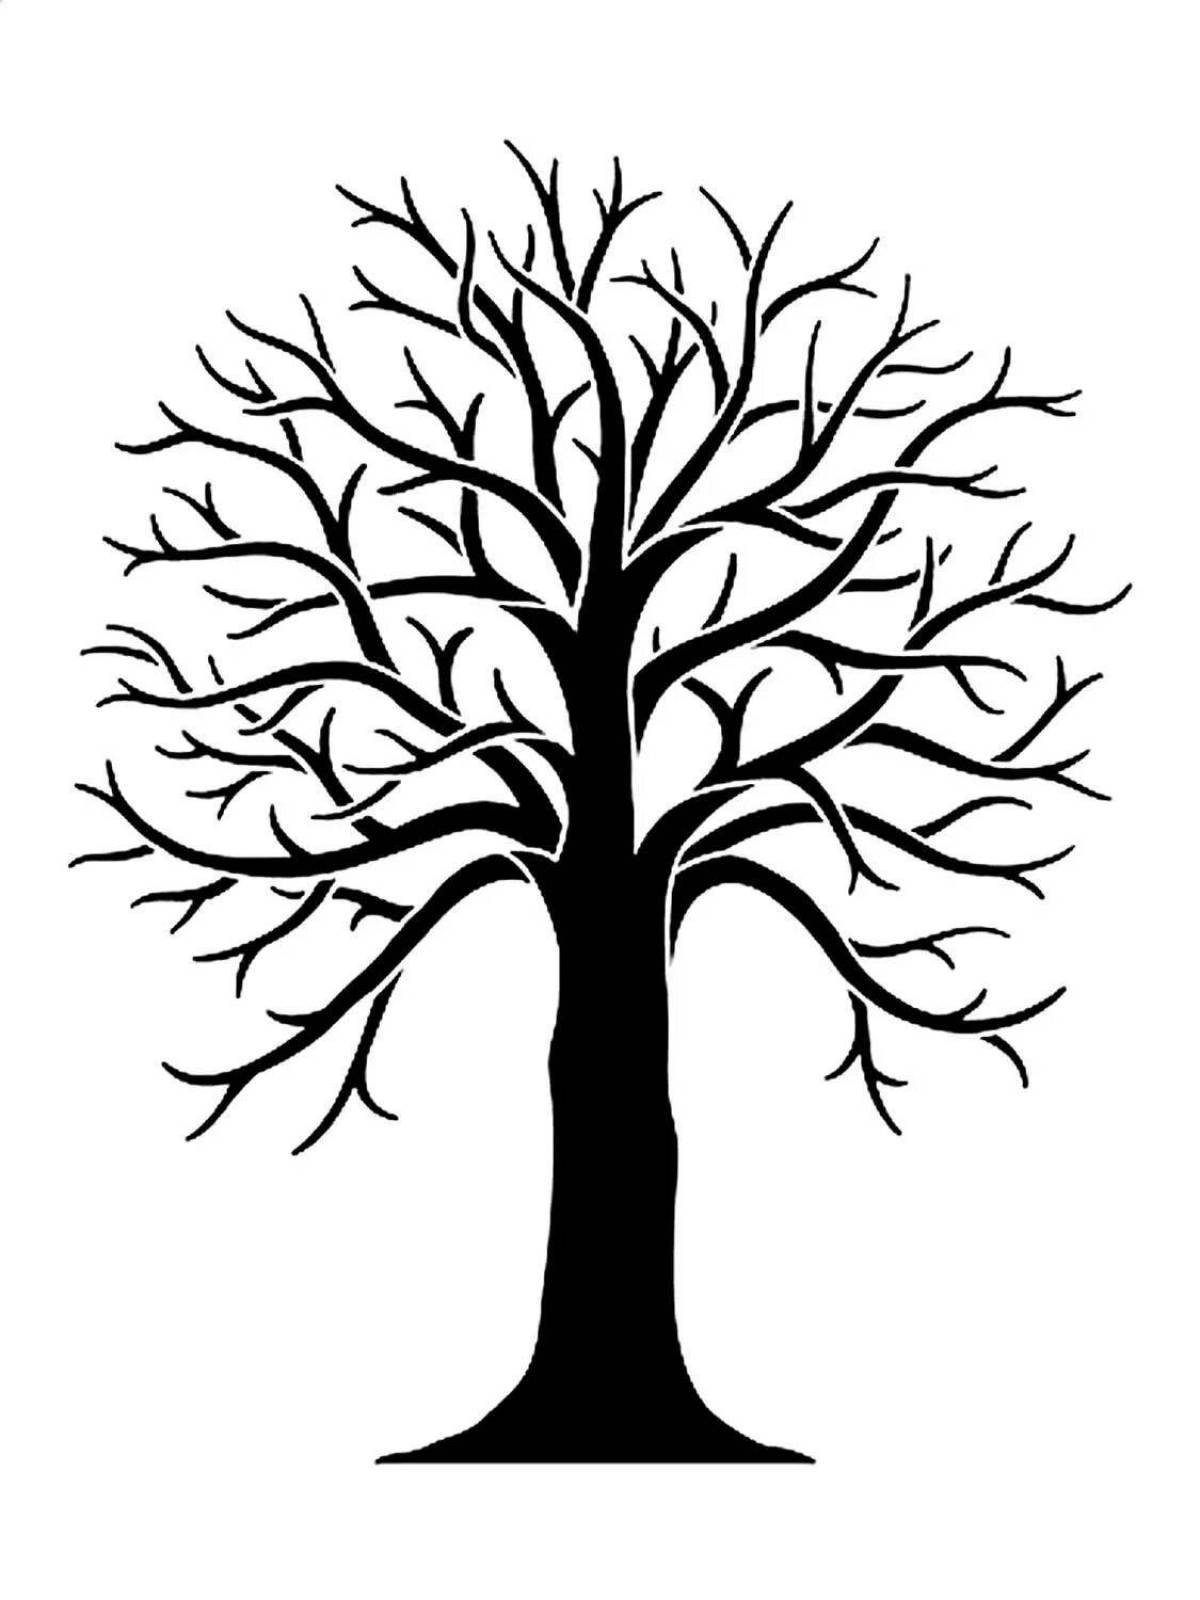 Coloring page graceful tree silhouette